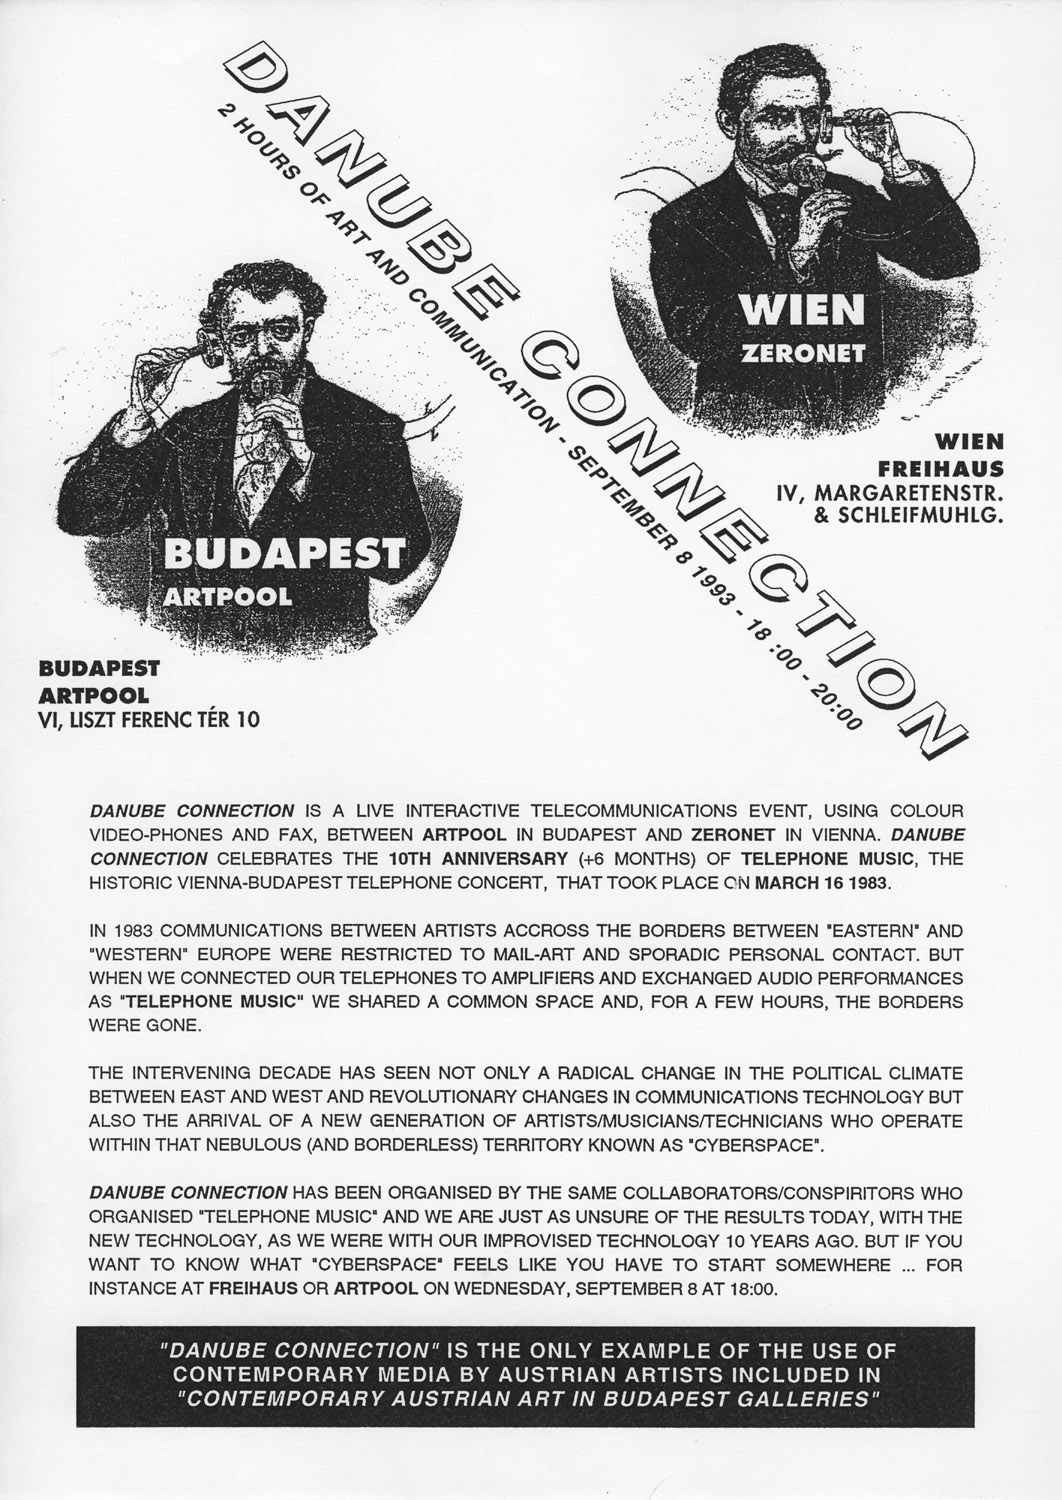 Press release by Zeronet for Danube Connection, 1993